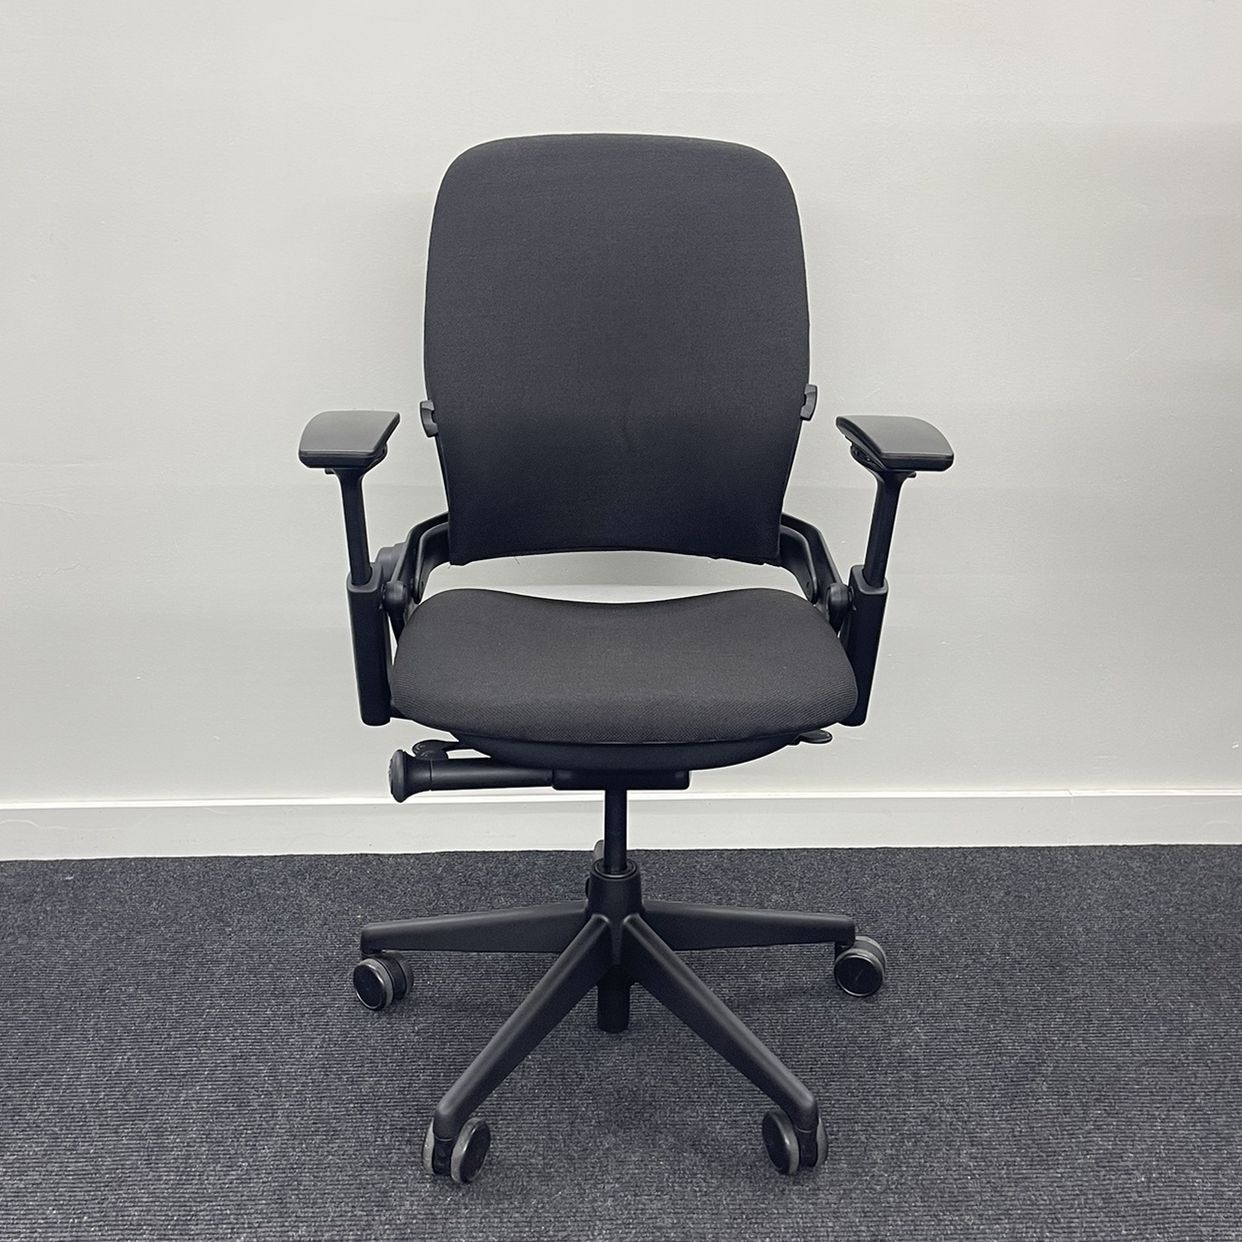 LIKE NEW STEELCASE LEAP V2 CHAIR! FULLY LOADED WITH LUMBAR SUPPORT!